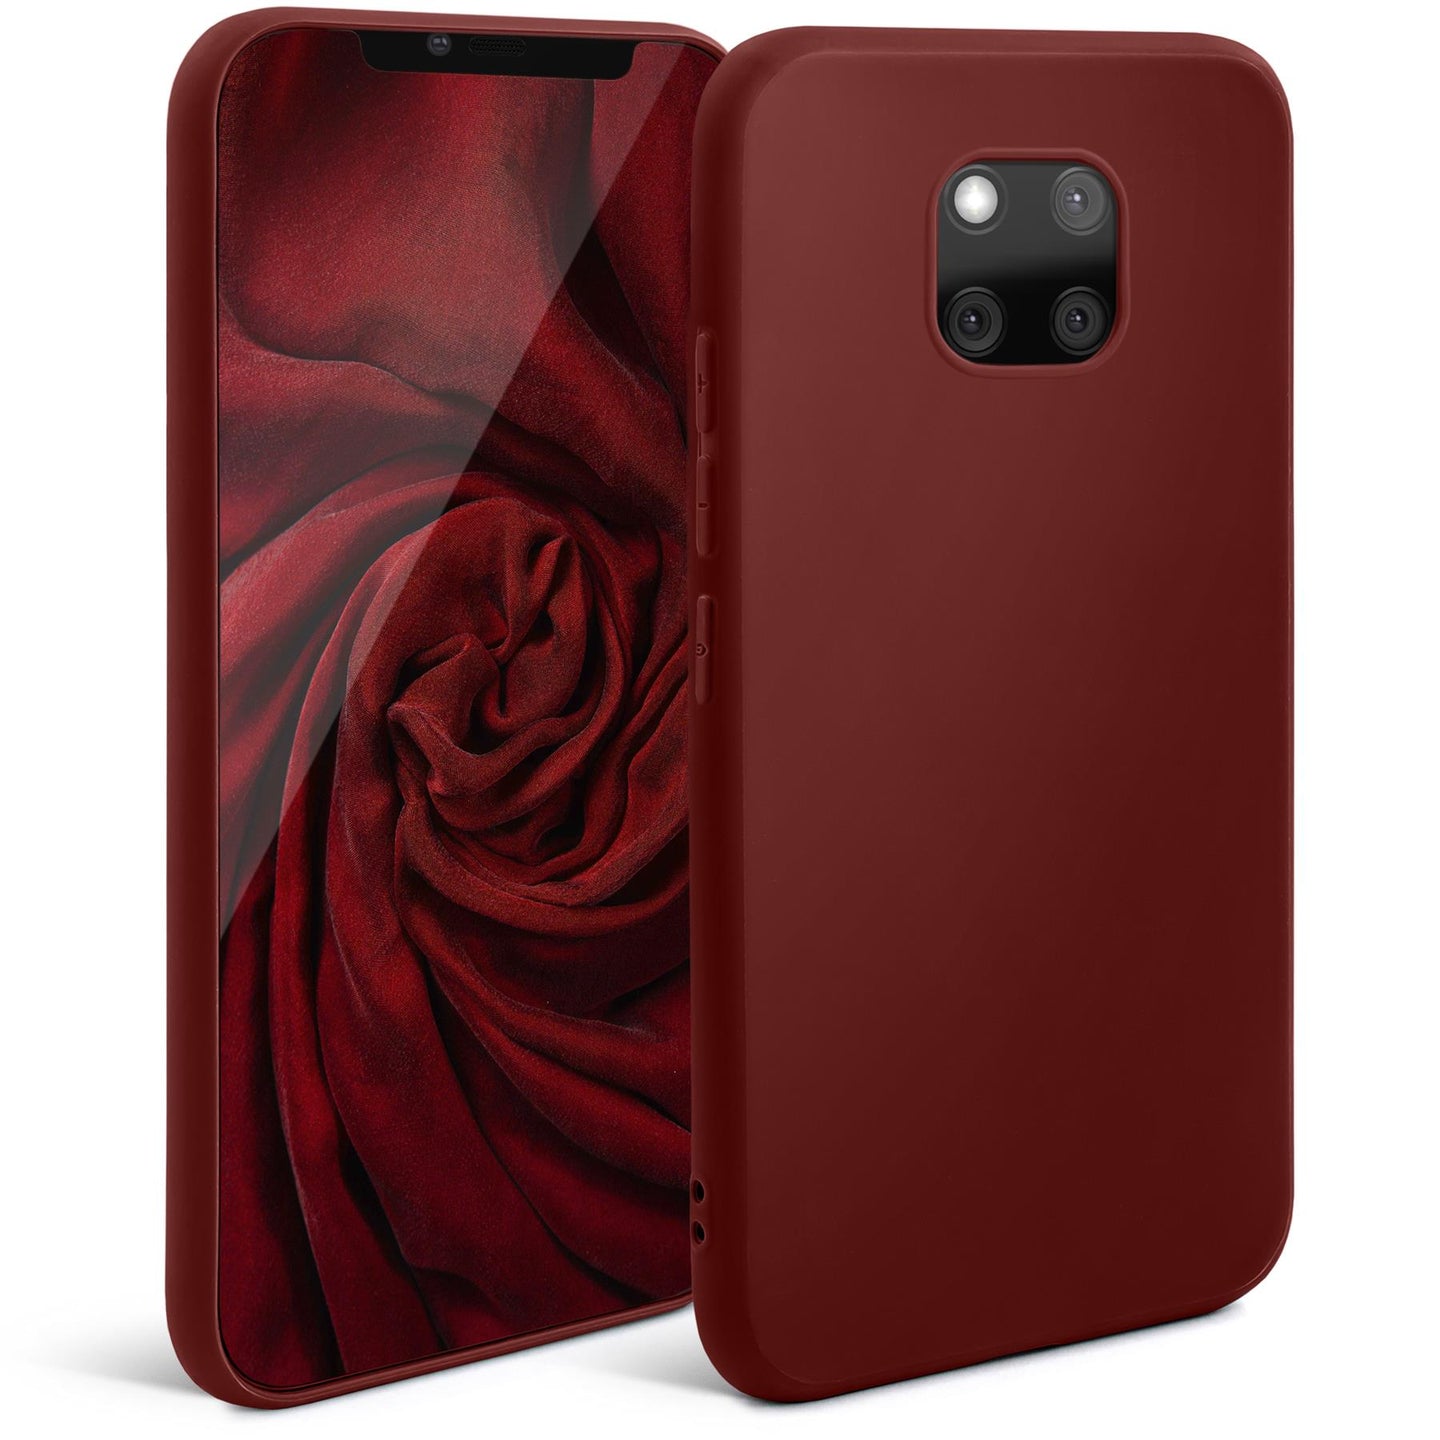 Moozy Minimalist Series Silicone Case for Huawei Mate 20 Pro, Wine Red - Matte Finish Lightweight Mobile Phone Case Slim Soft Protective TPU Cover with Matte Surface